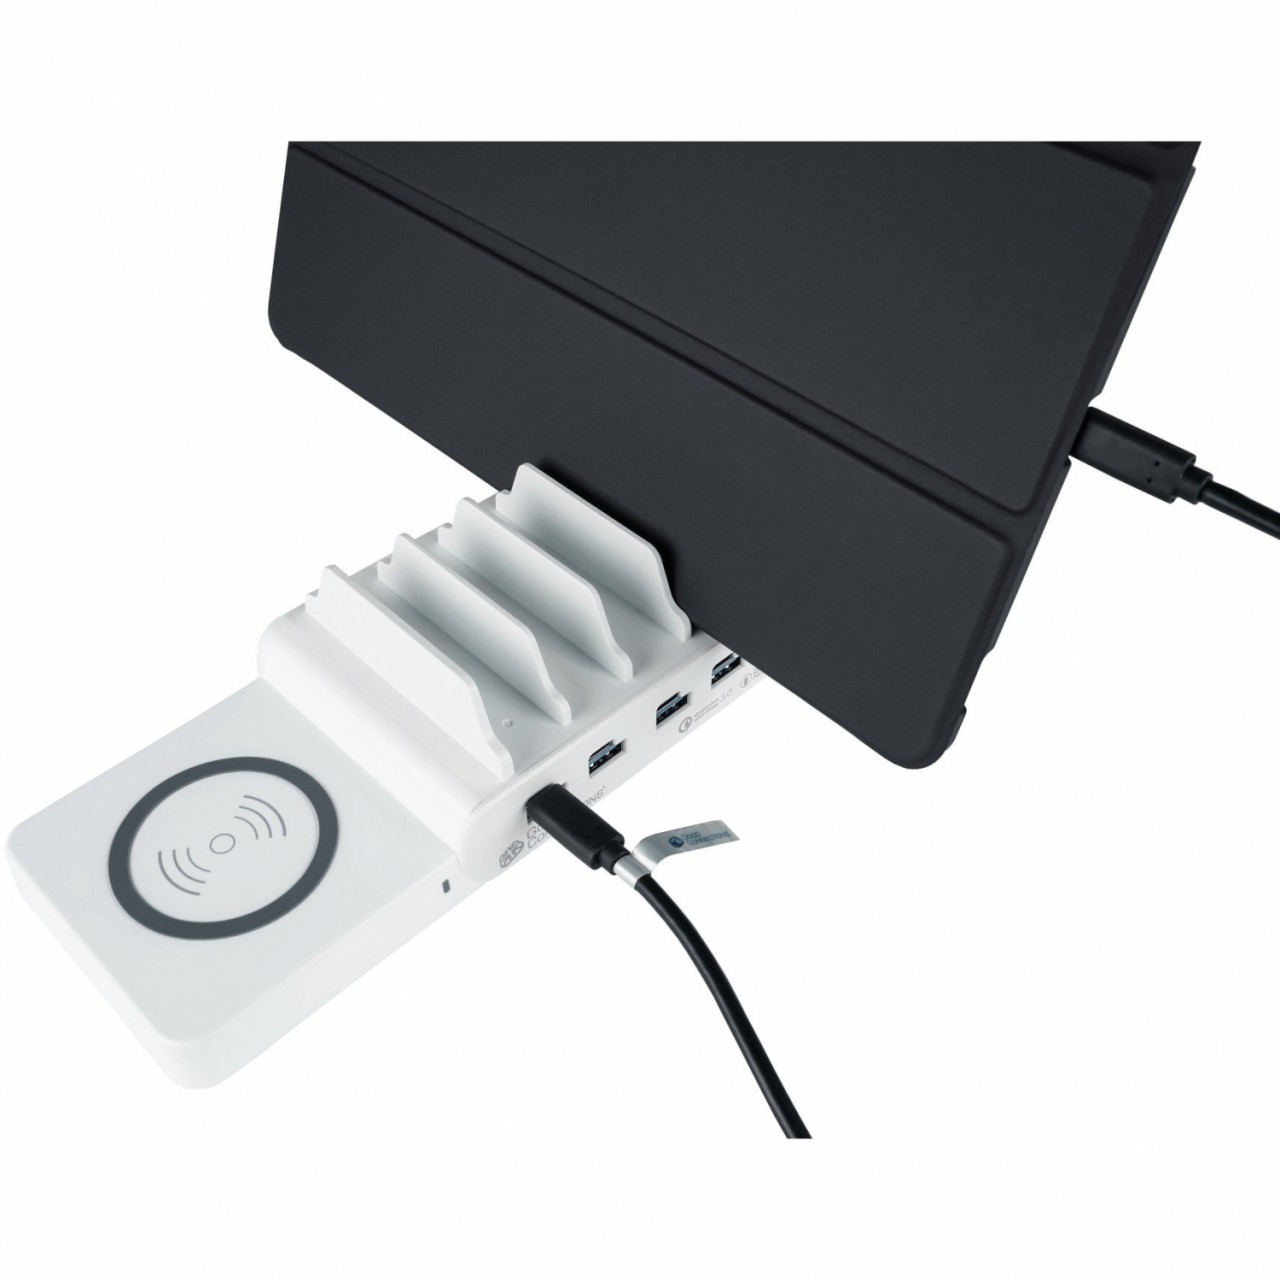 Good Connections Qi Wireless Charging Pad 15W für Good Connections